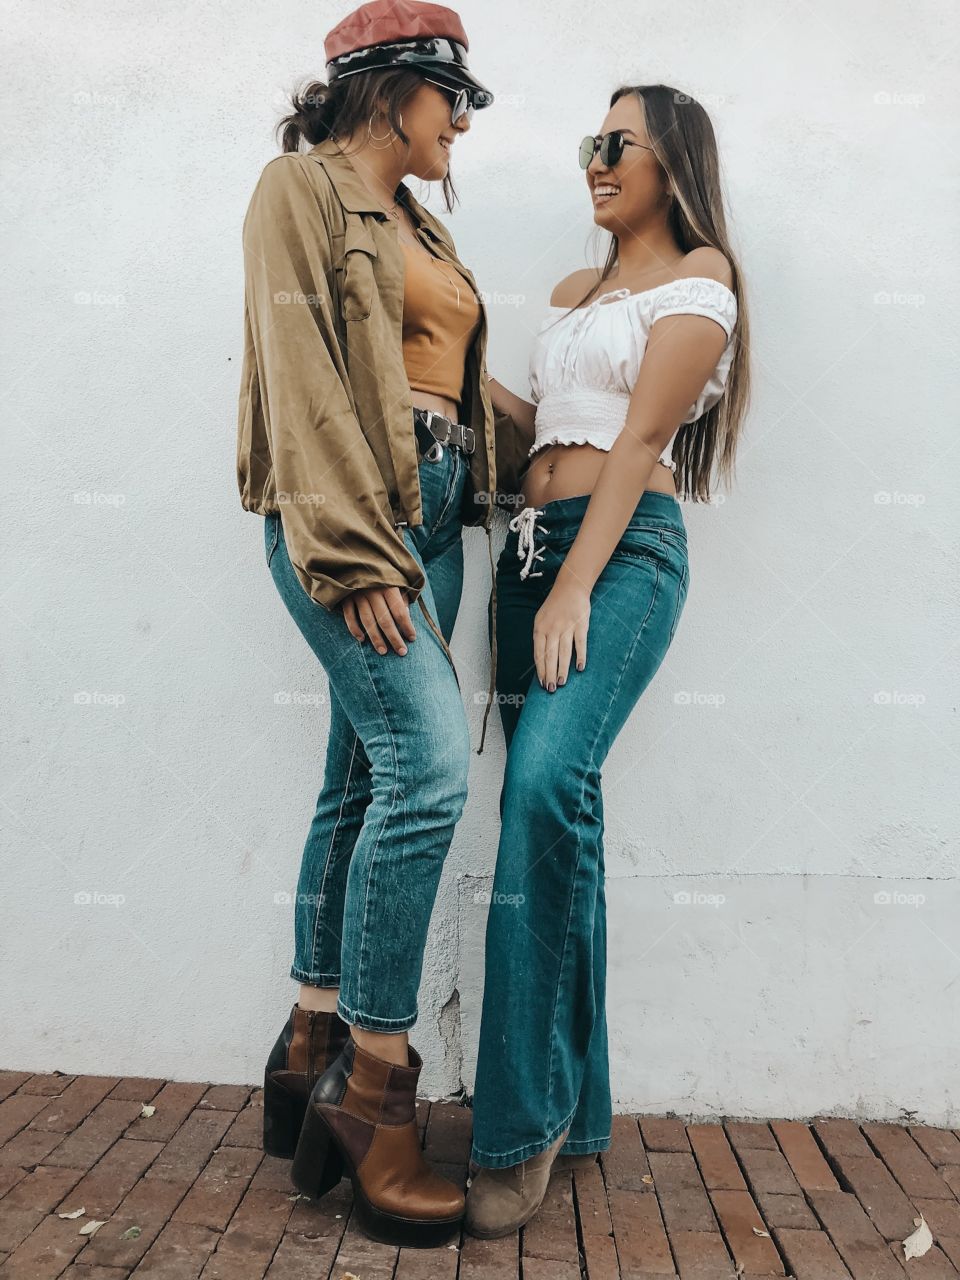 Young friends enjoying the day in their cute vintage outfits and Bell bottom jeans.